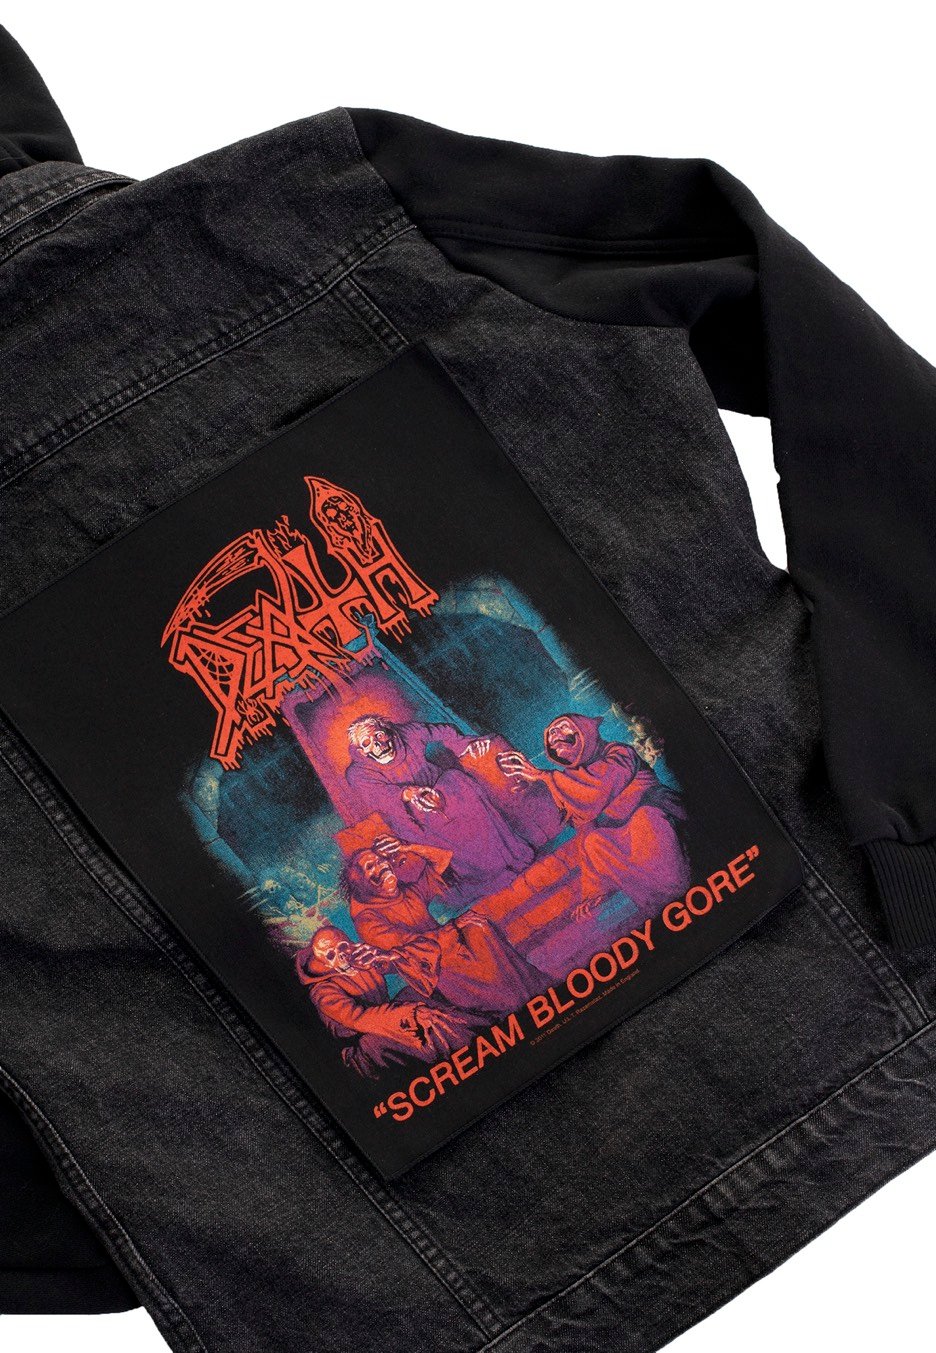 Death - Scream Bloody Gore - Backpatch